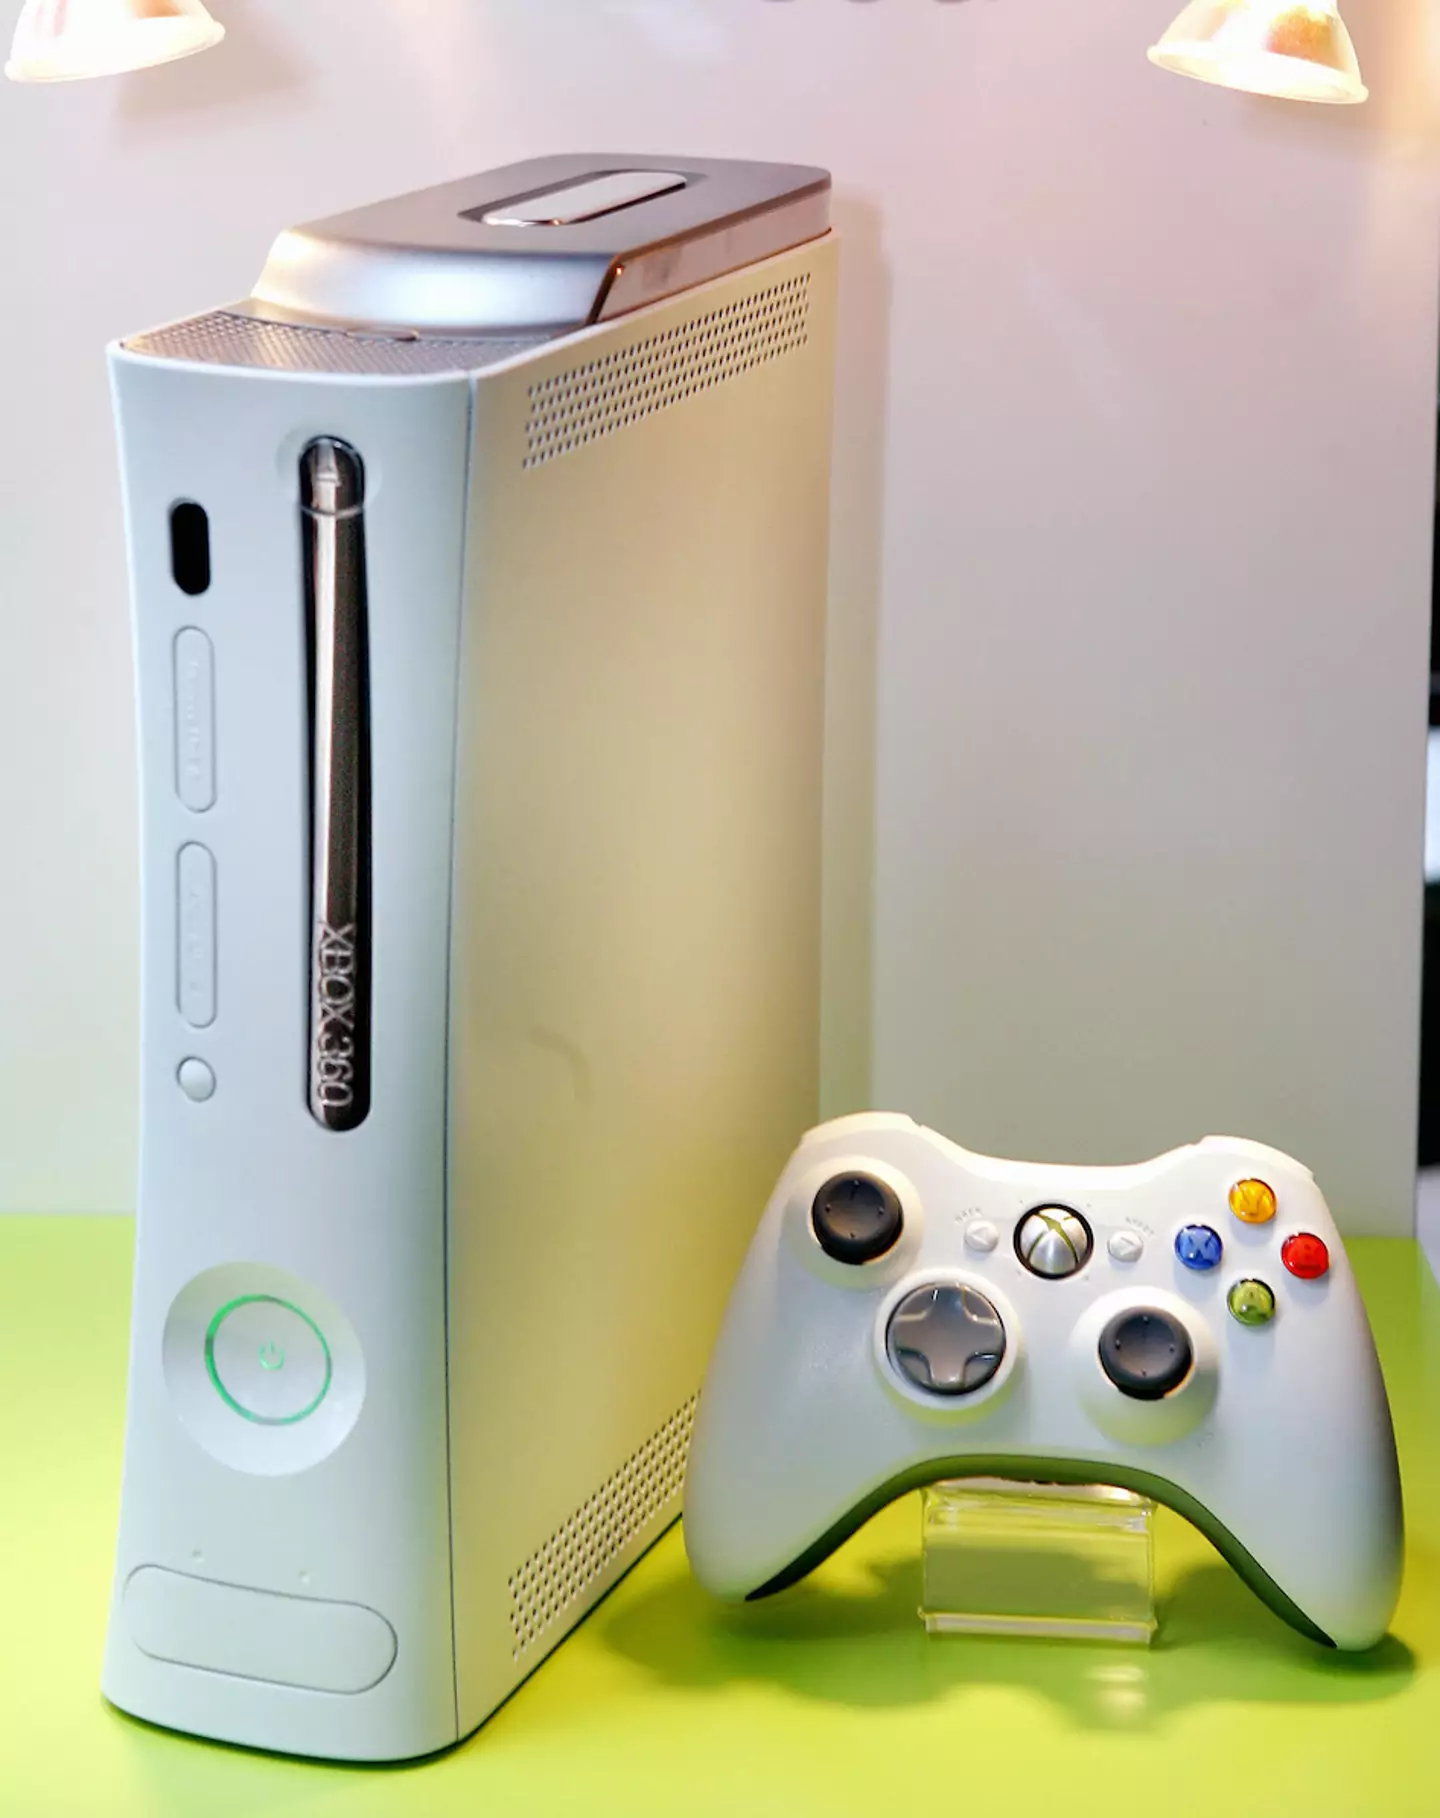 A working Xbox 360 should have green lights around the 'on' switch... not red.